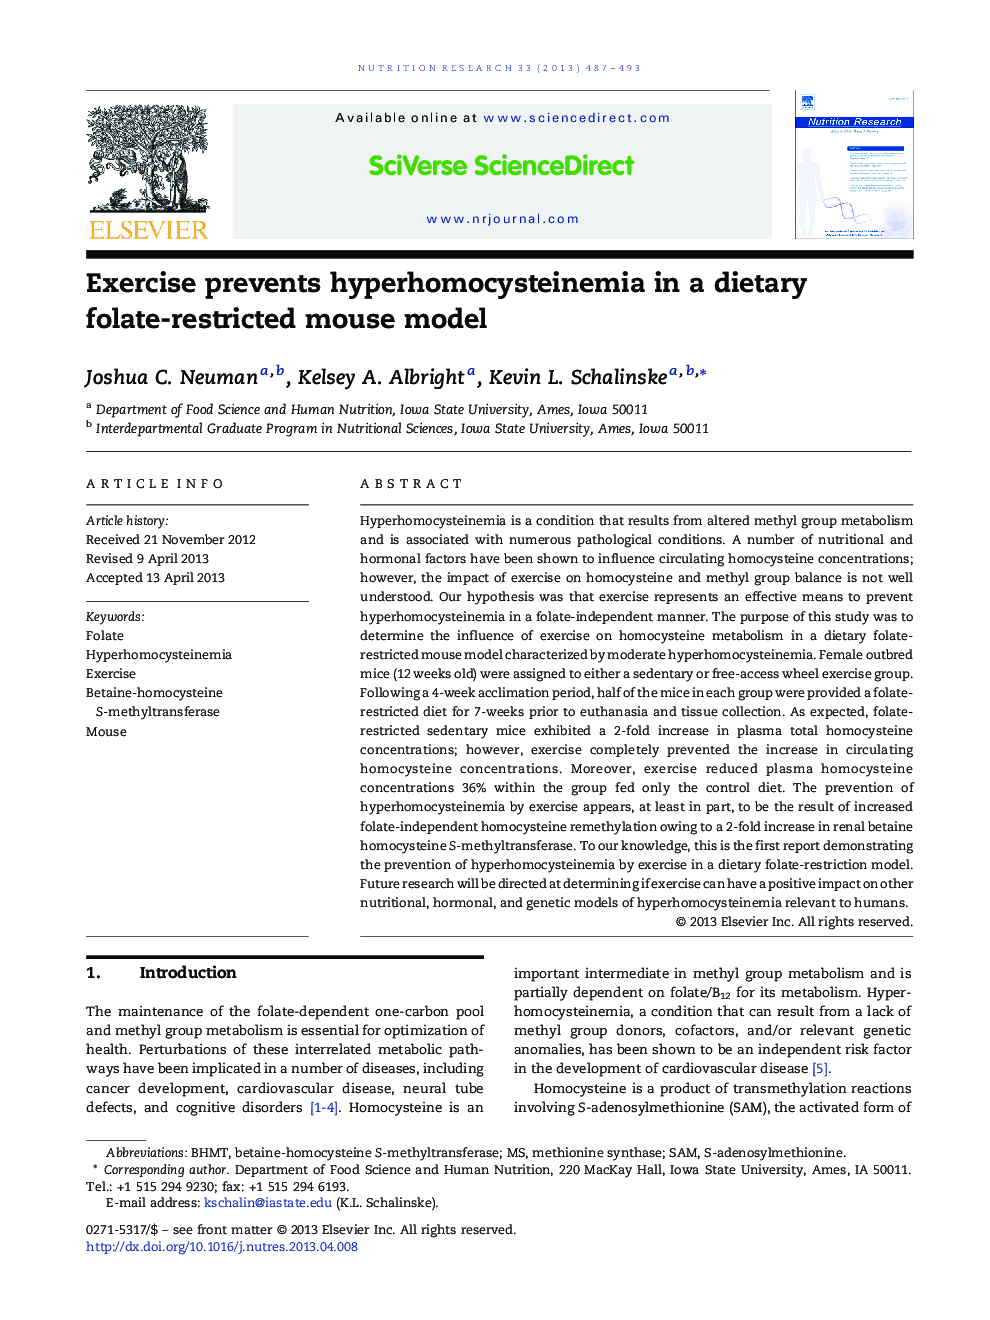 Exercise prevents hyperhomocysteinemia in a dietary folate-restricted mouse model